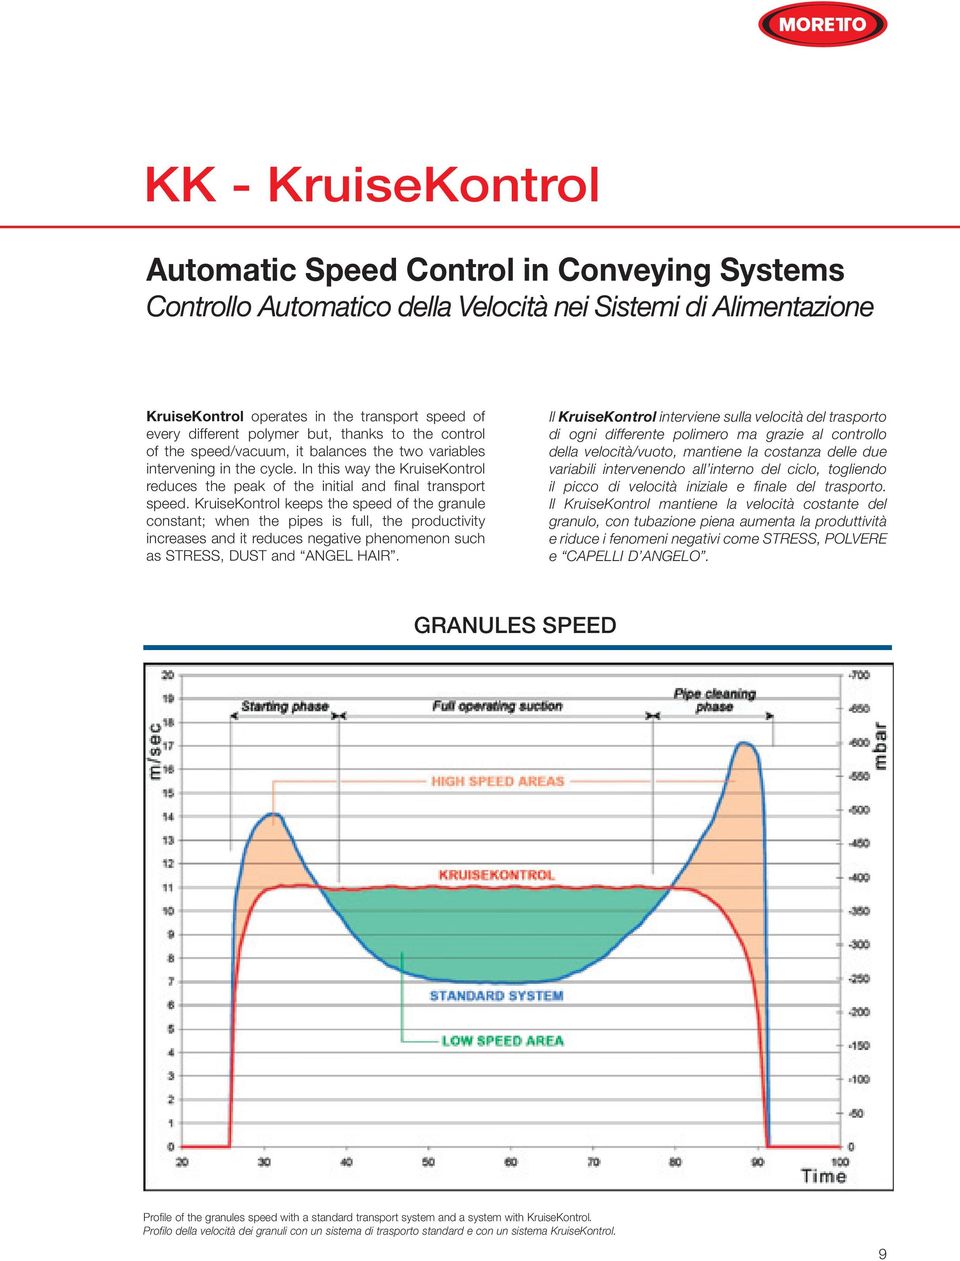 KruiseKontrol keeps the speed of the granule constant; when the pipes is full, the productivity increases and it reduces negative phenomenon such as STRESS, DUST and ANGEL HAIR.